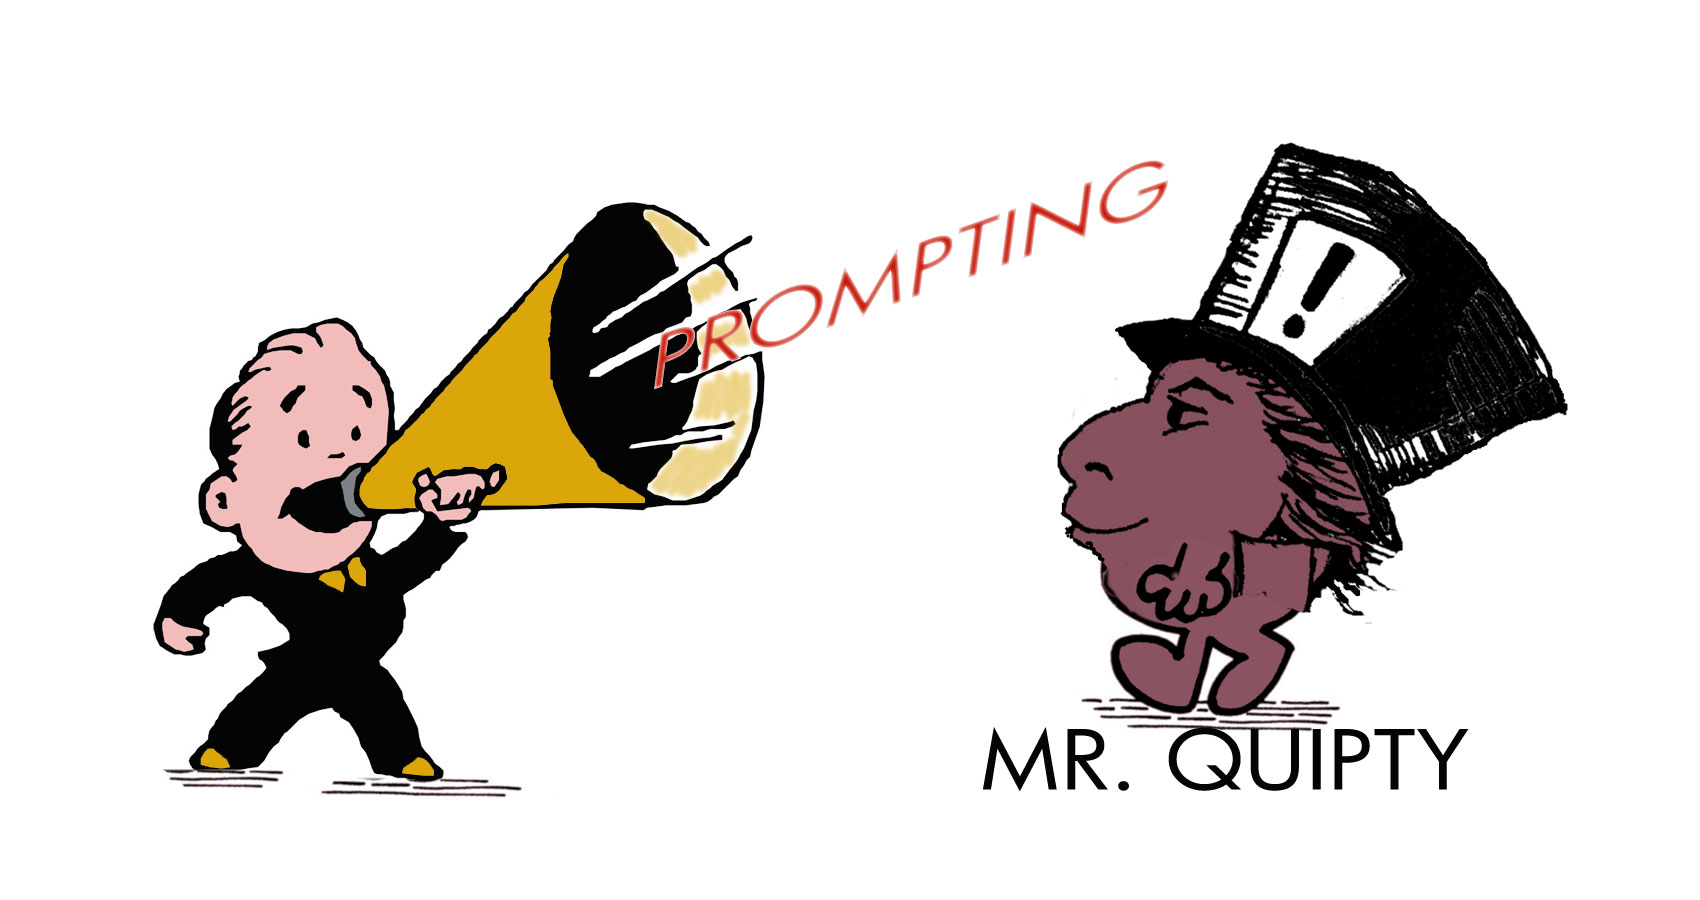 Prompting MR. QUIPTY at Spillwords.com